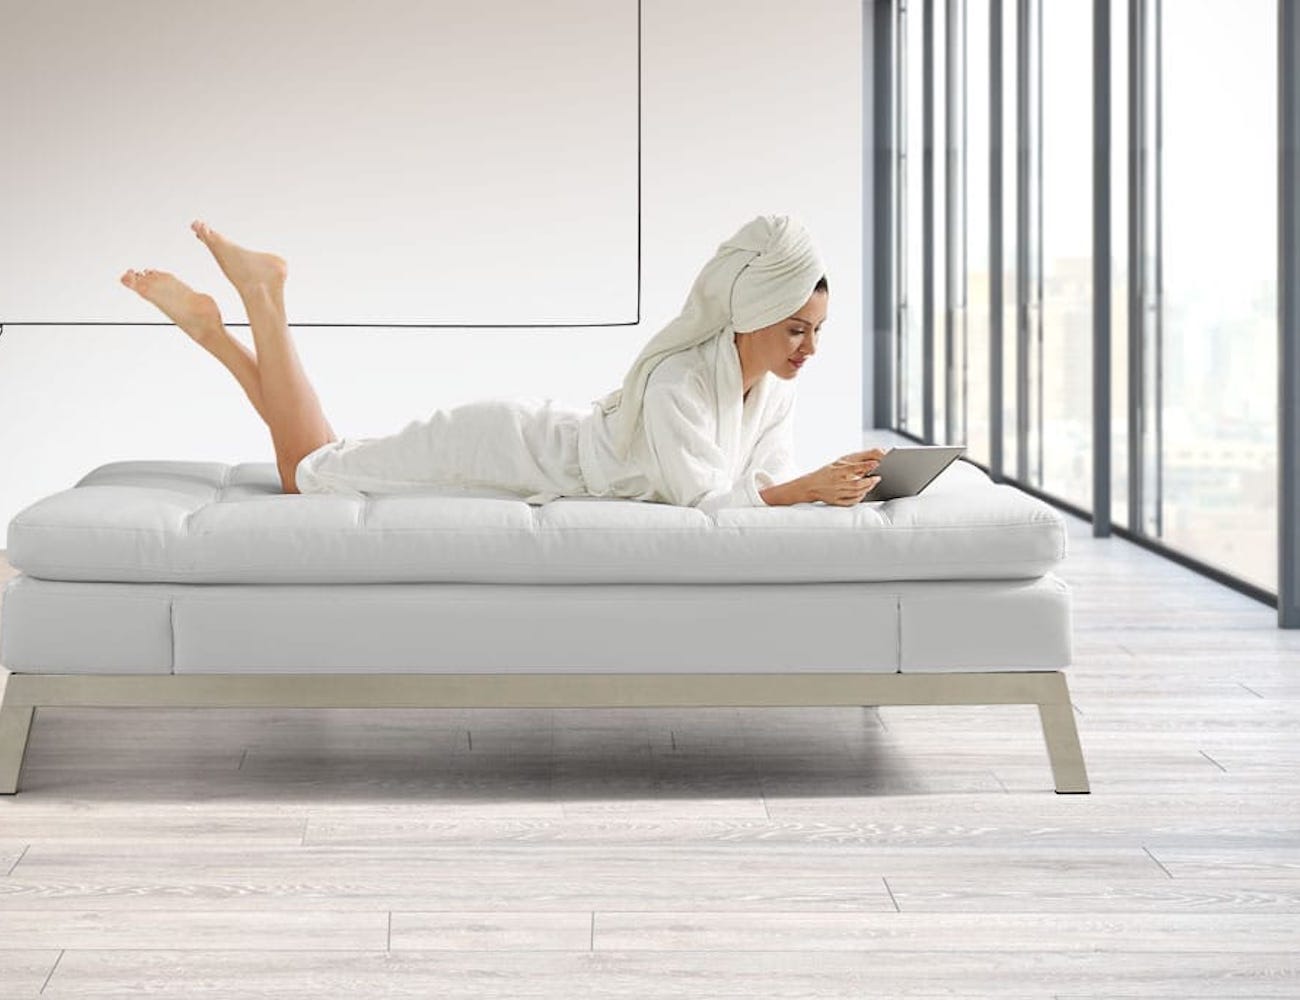 Coddle Couch Convertible Bed has everything you need to relax